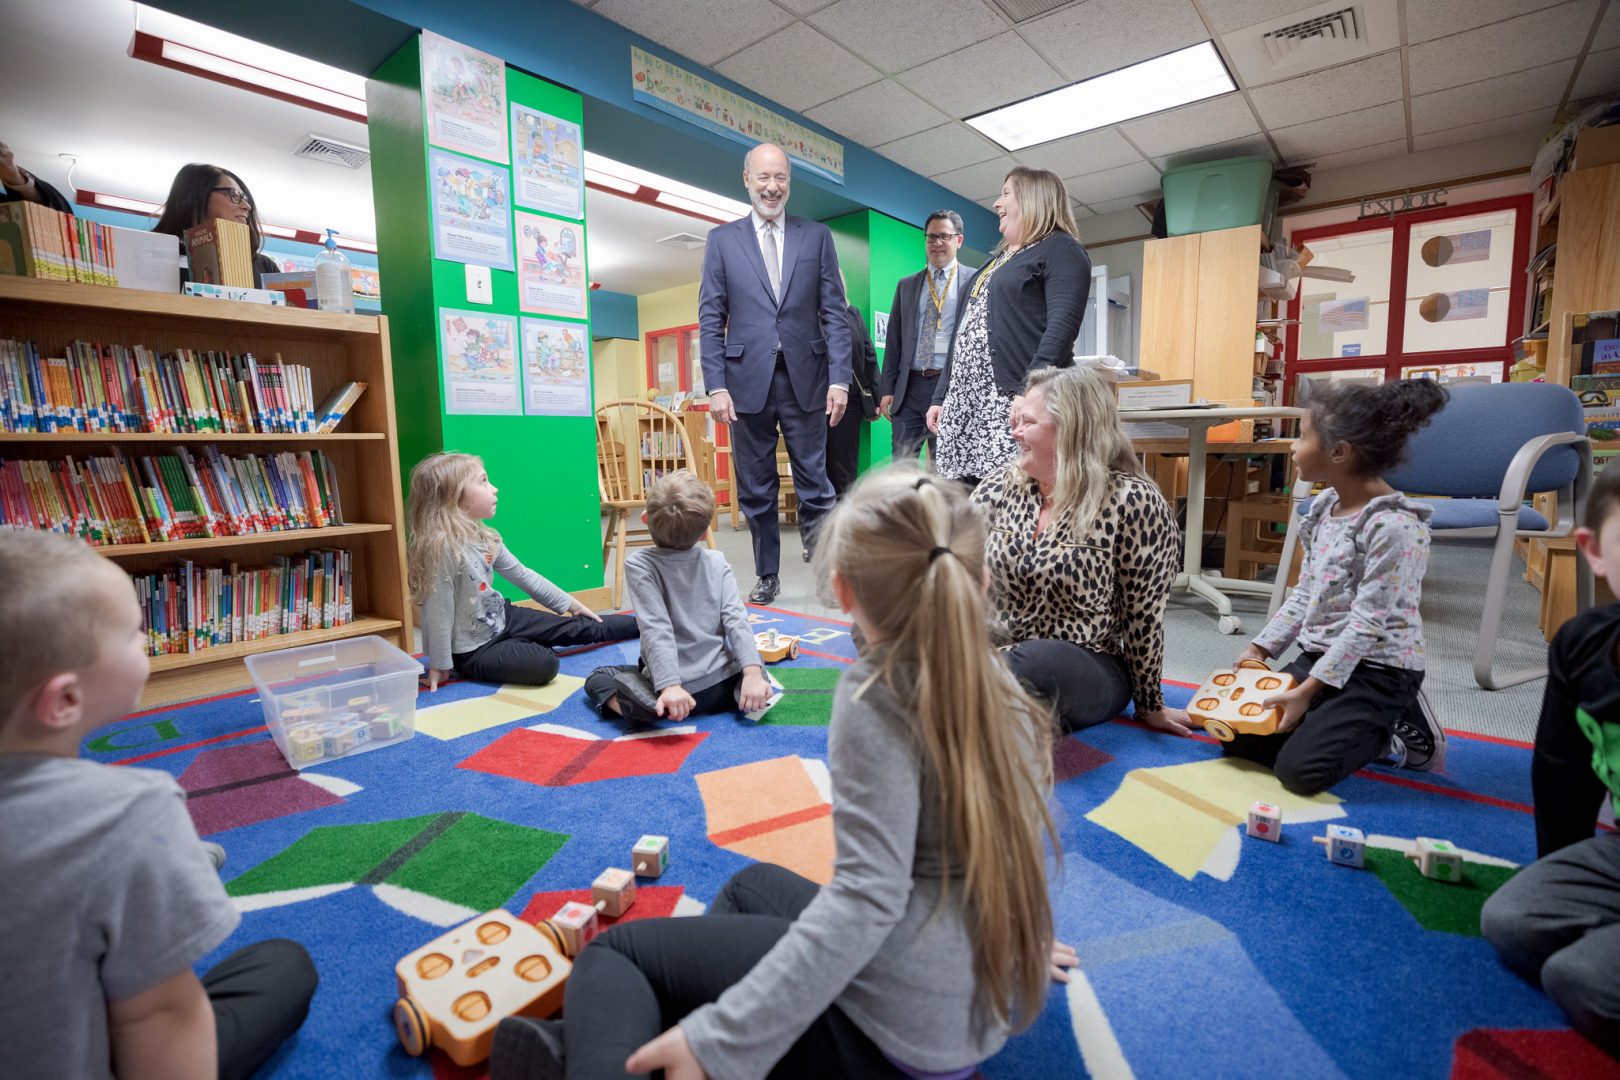 FILE PHOTO: In this Nov. 15, 2019 photo Governor Tom Wolf visits a kindergarten in Prospect Park, Pa.